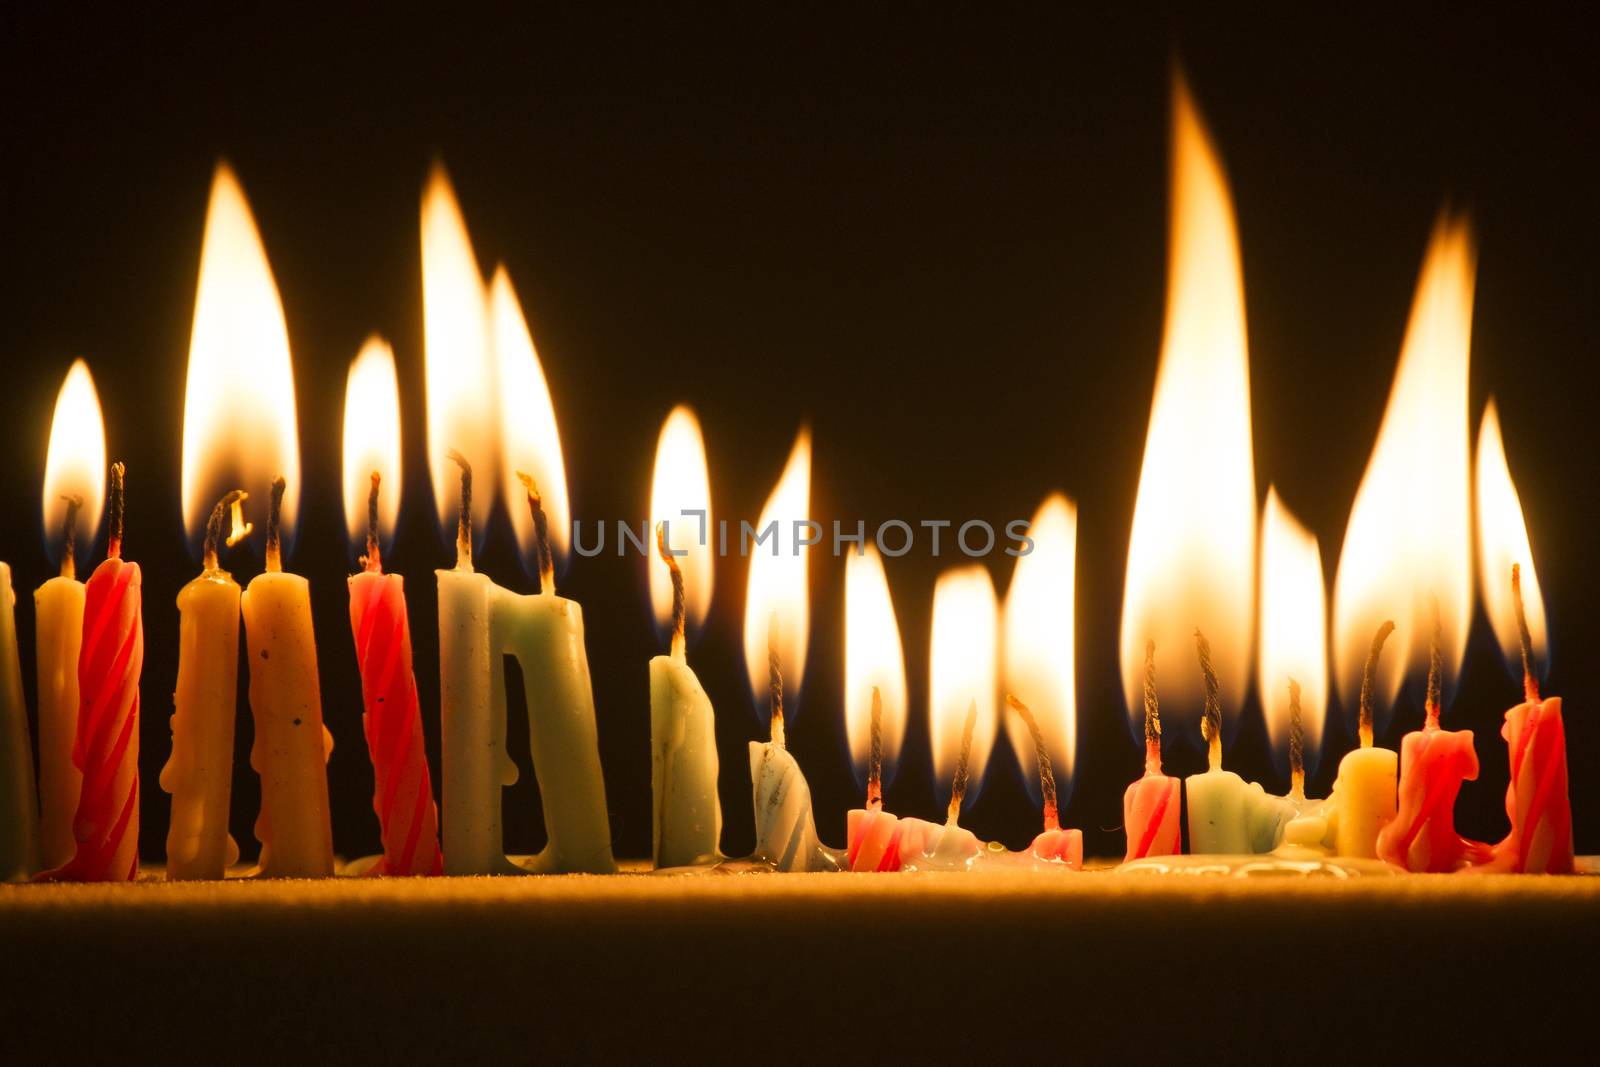 Series of small lighted candles on a black background